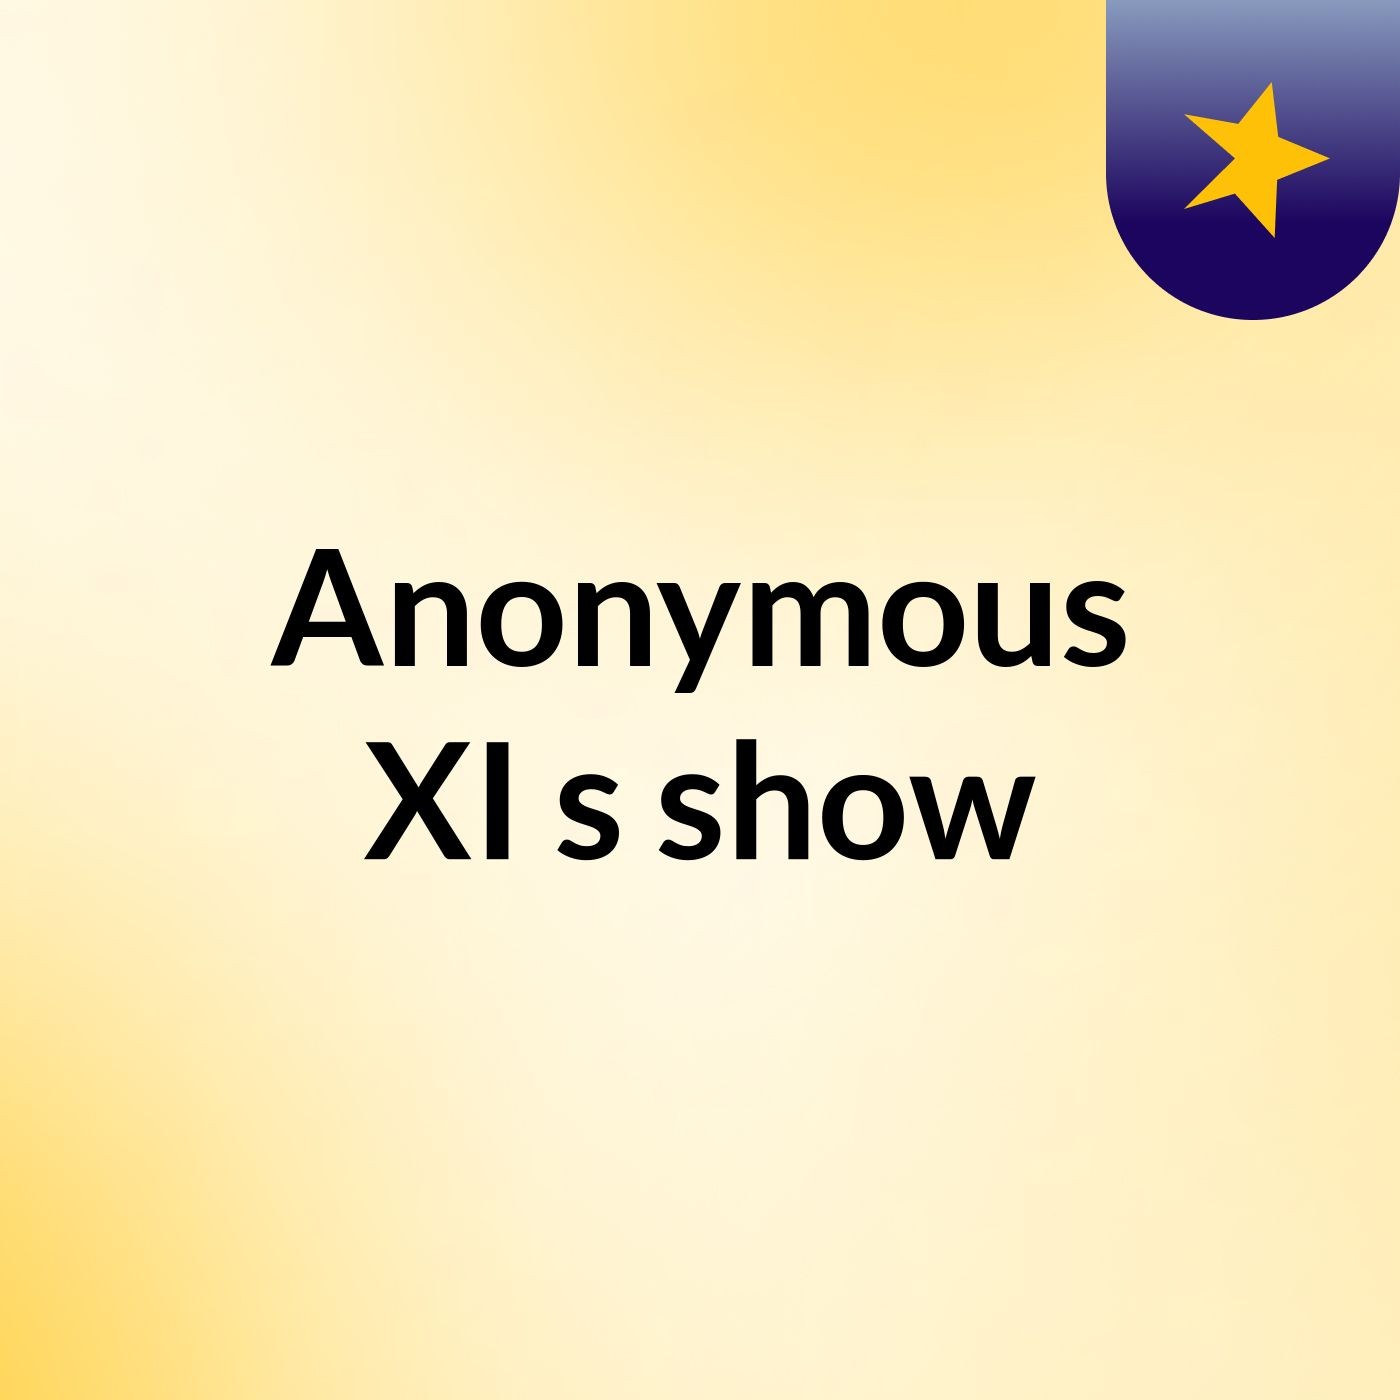 Anonymous XI's show